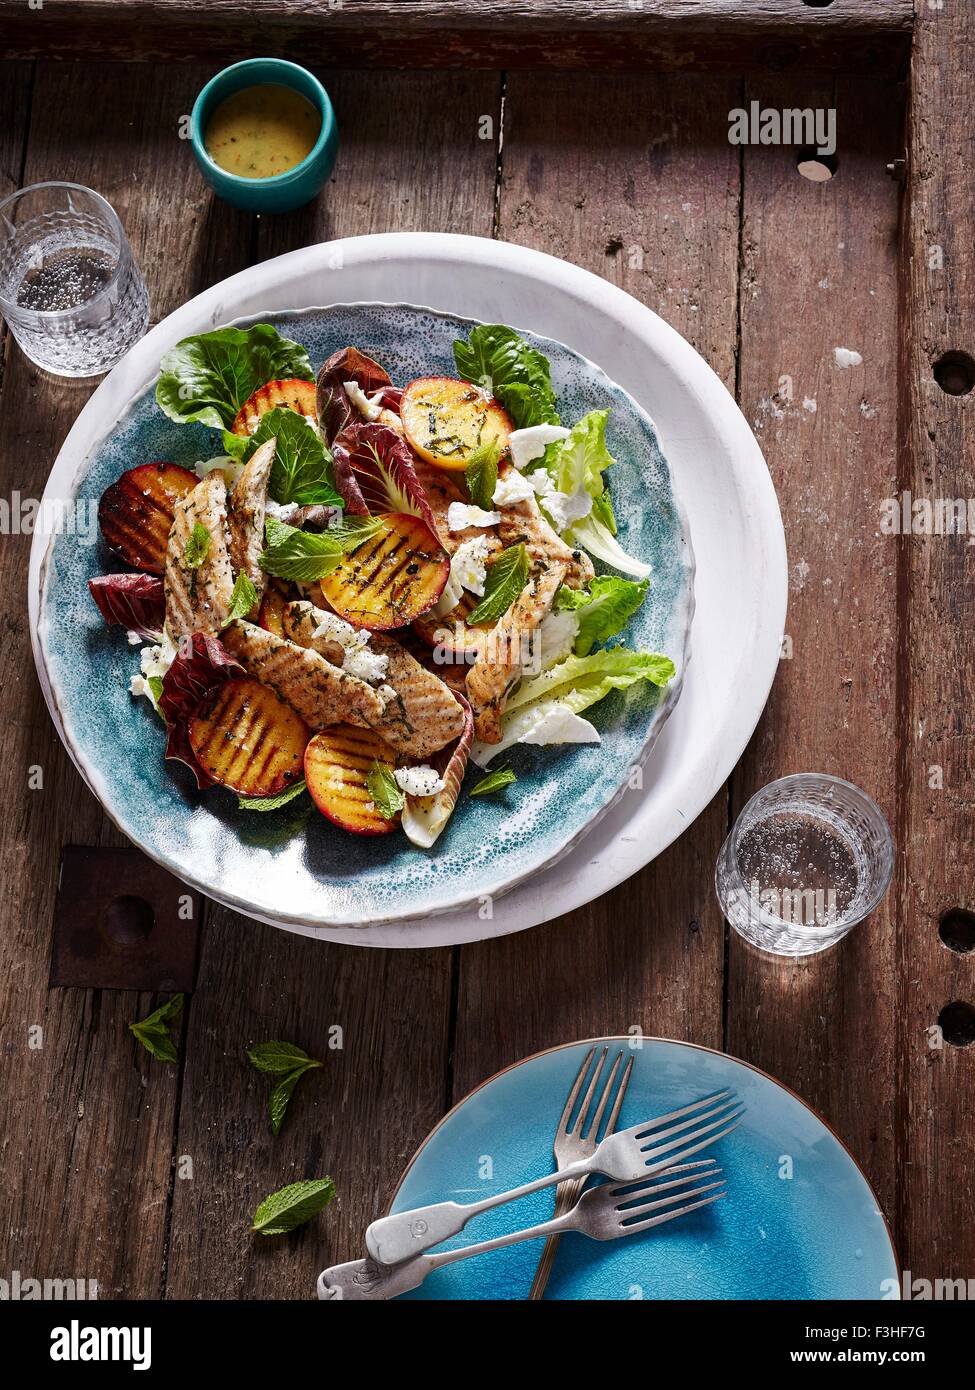 BBQ chicken, peach and cos lettuce salad Stock Photo